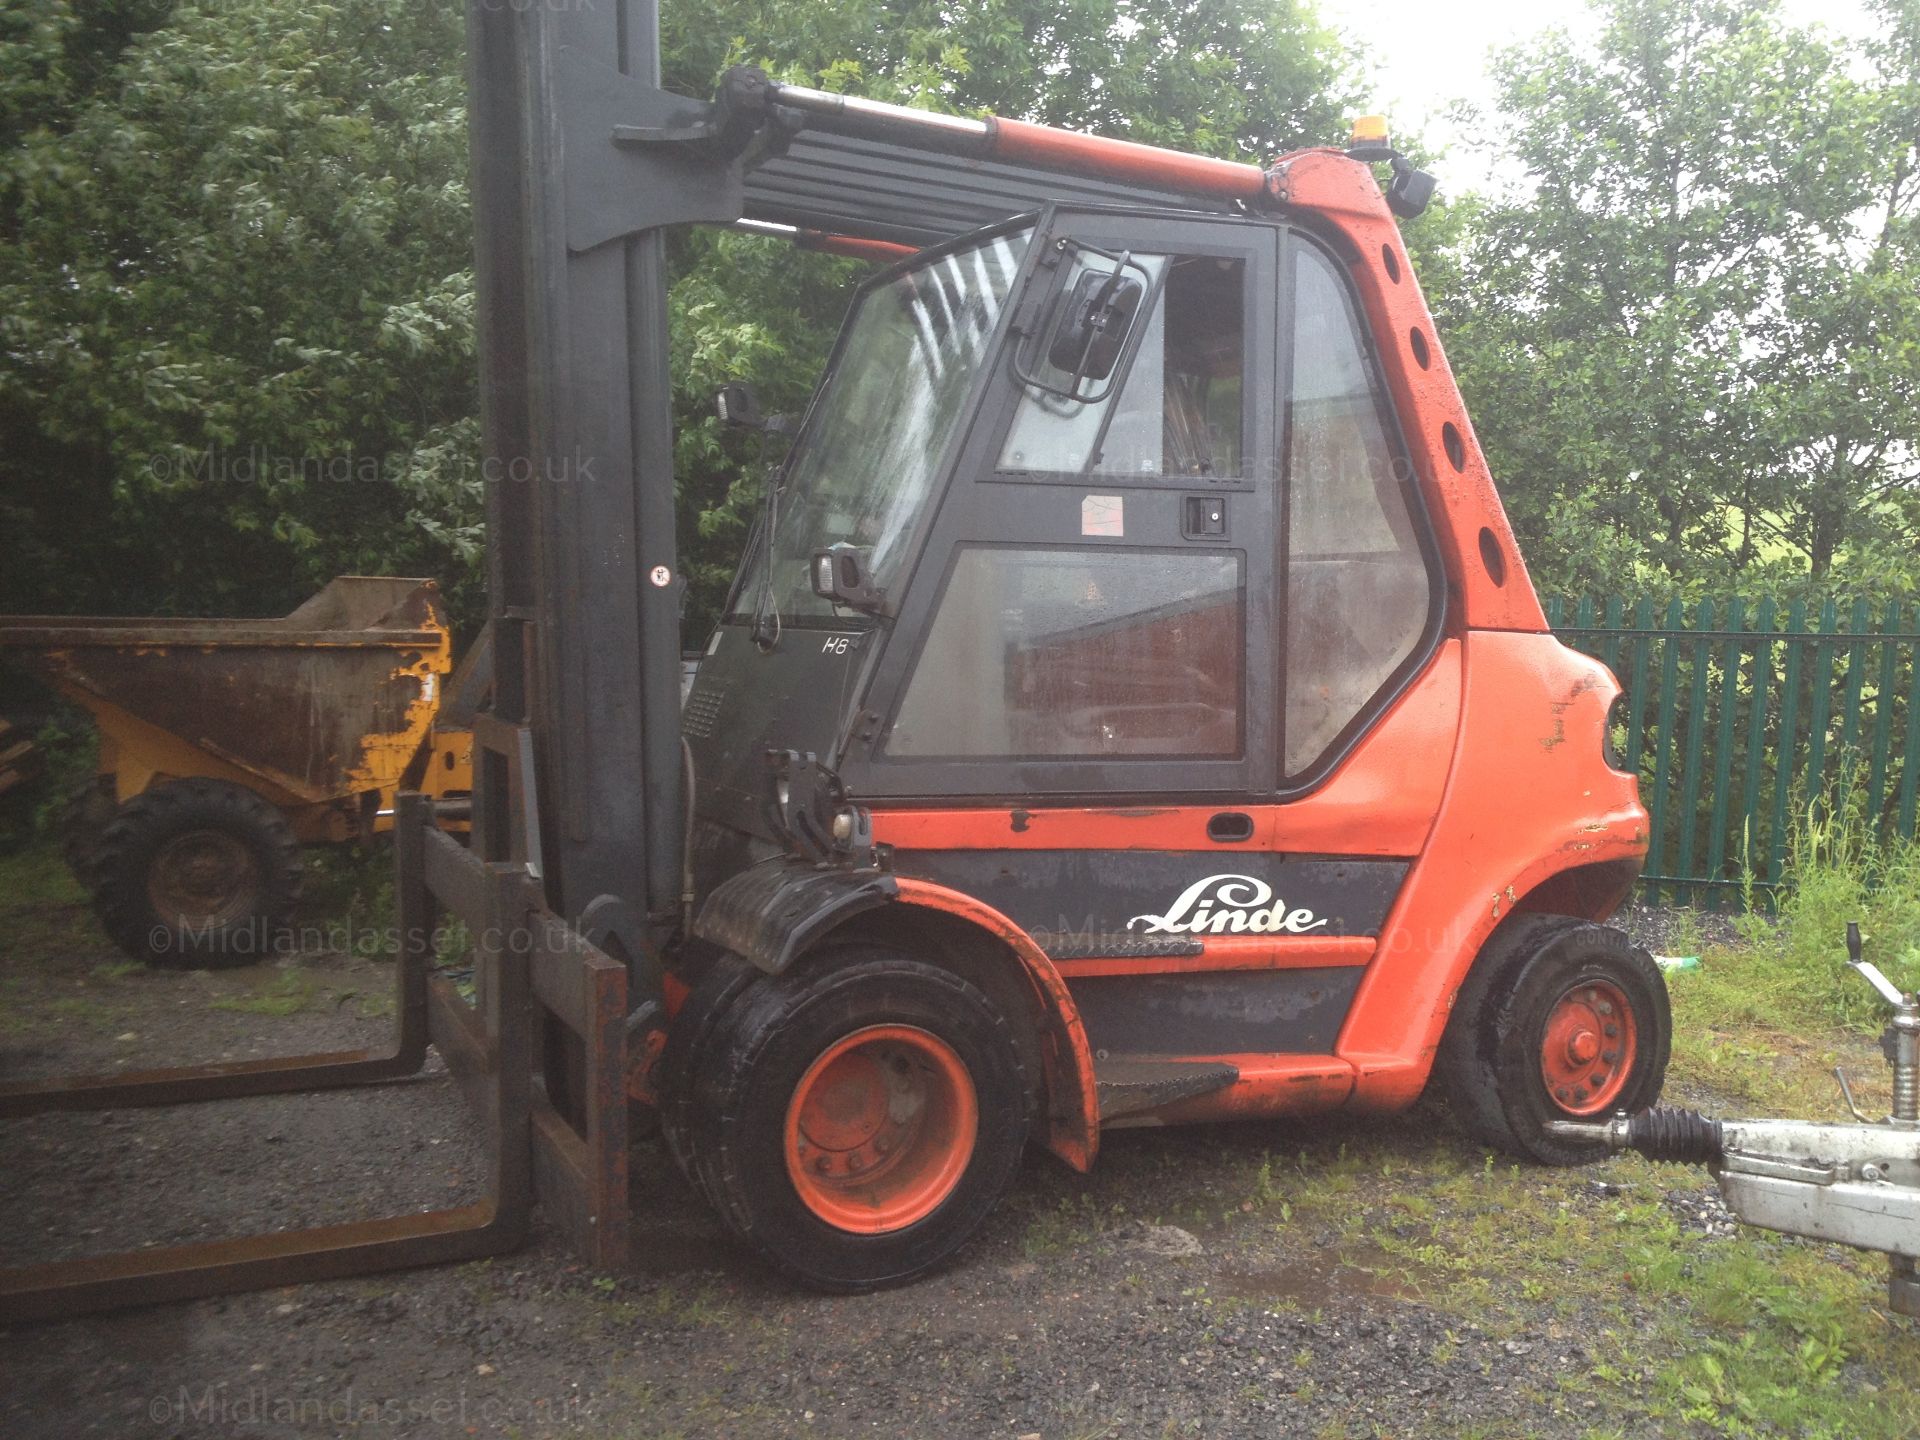 DS - 2004 LINDE 8 TONNE FORKTRUCK   YEAR OF MANUFACTURE: 2004 FULL CAB RUNS WELL  DIESEL  SHOWING - Image 3 of 6